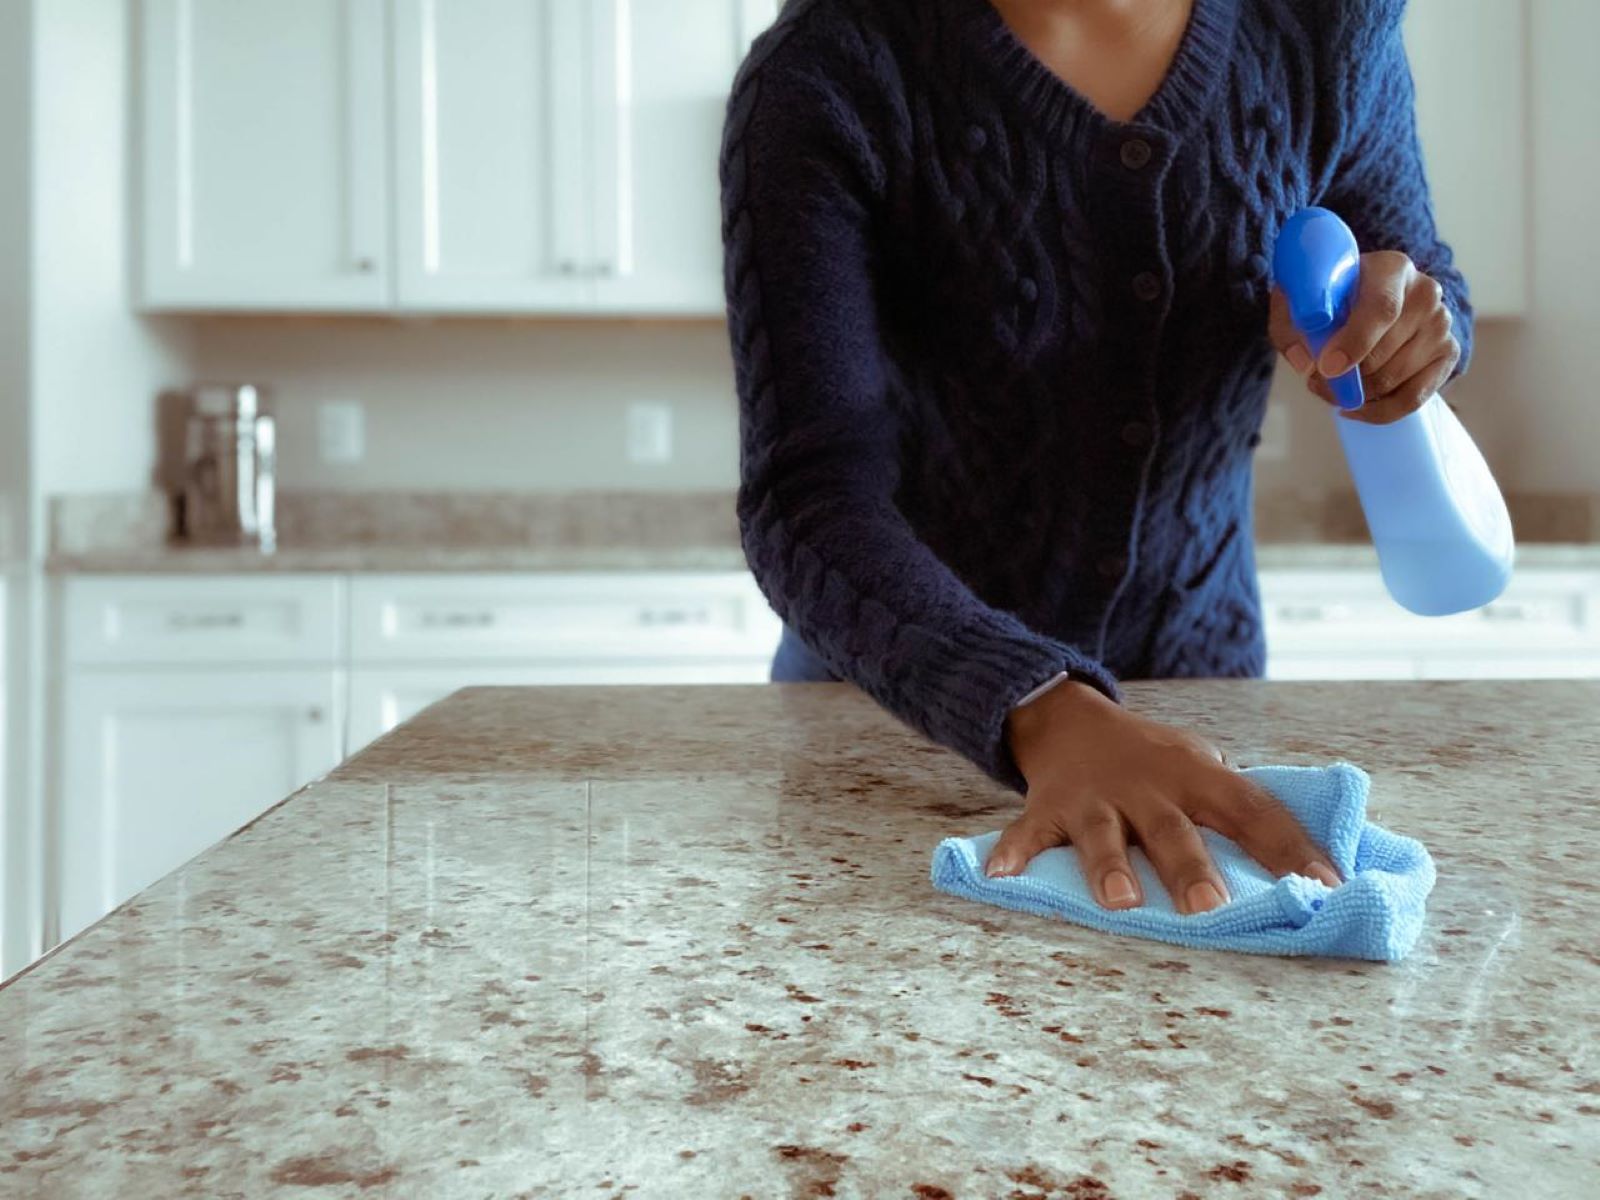 How To Disinfect Kitchen Countertops